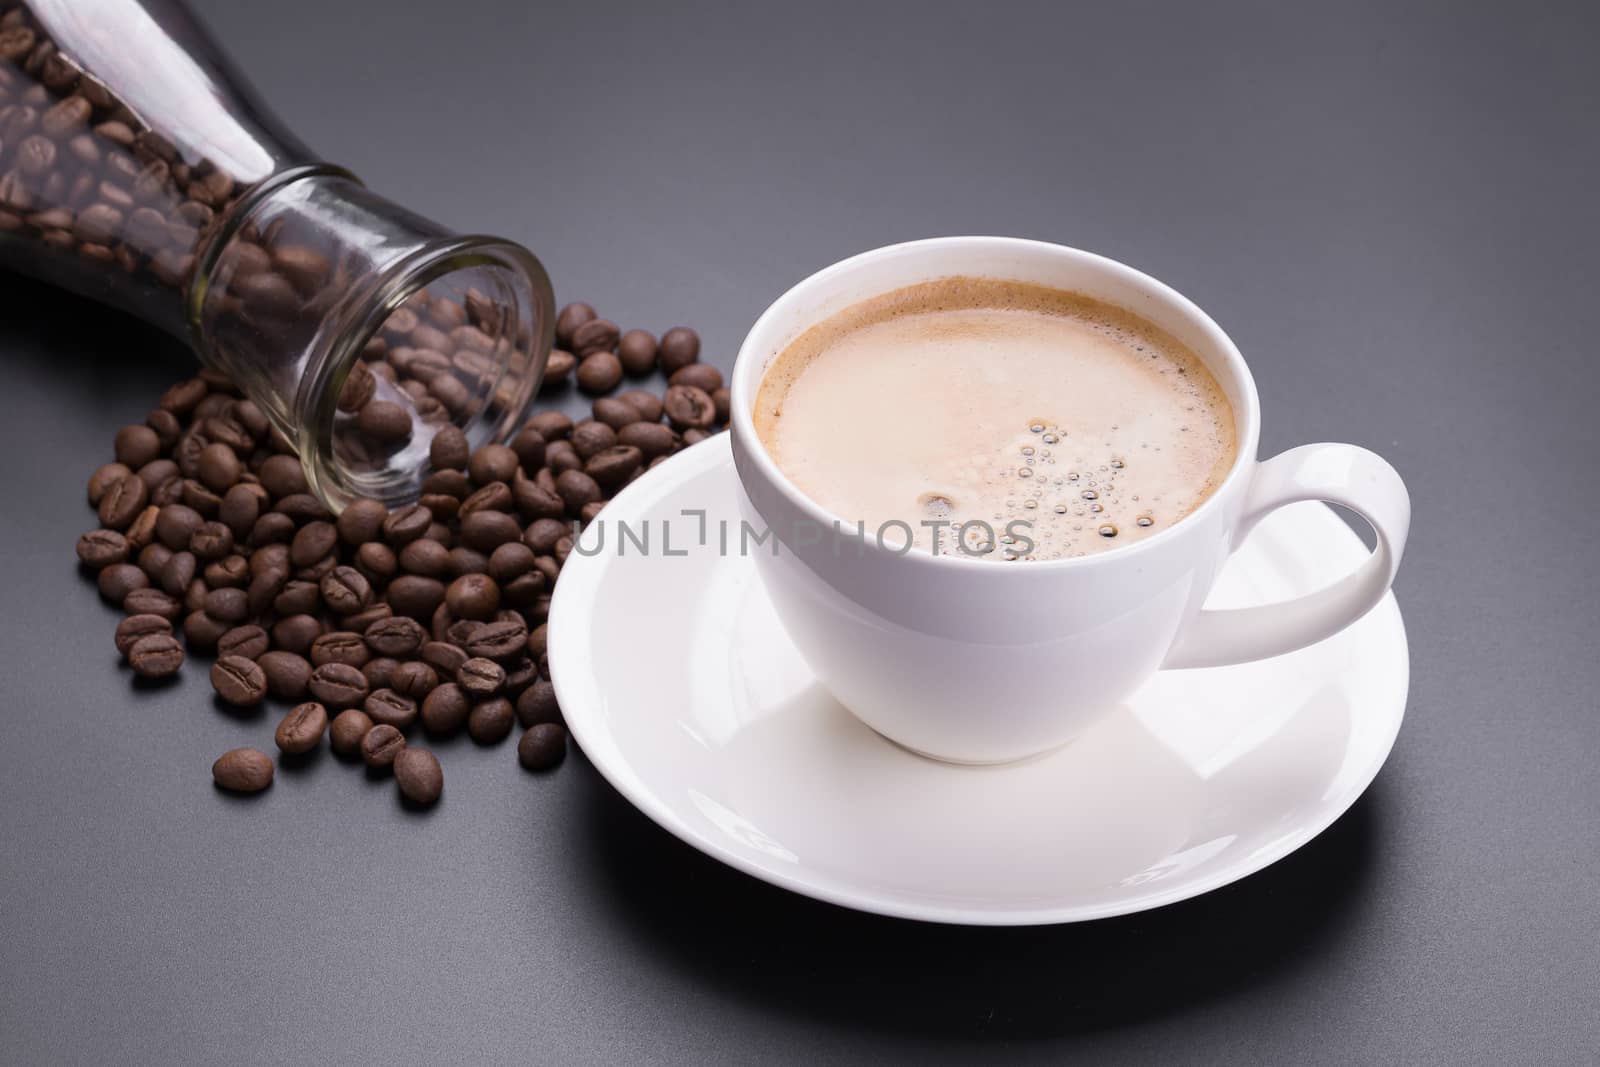 Hot americano coffee in white glass on black background.